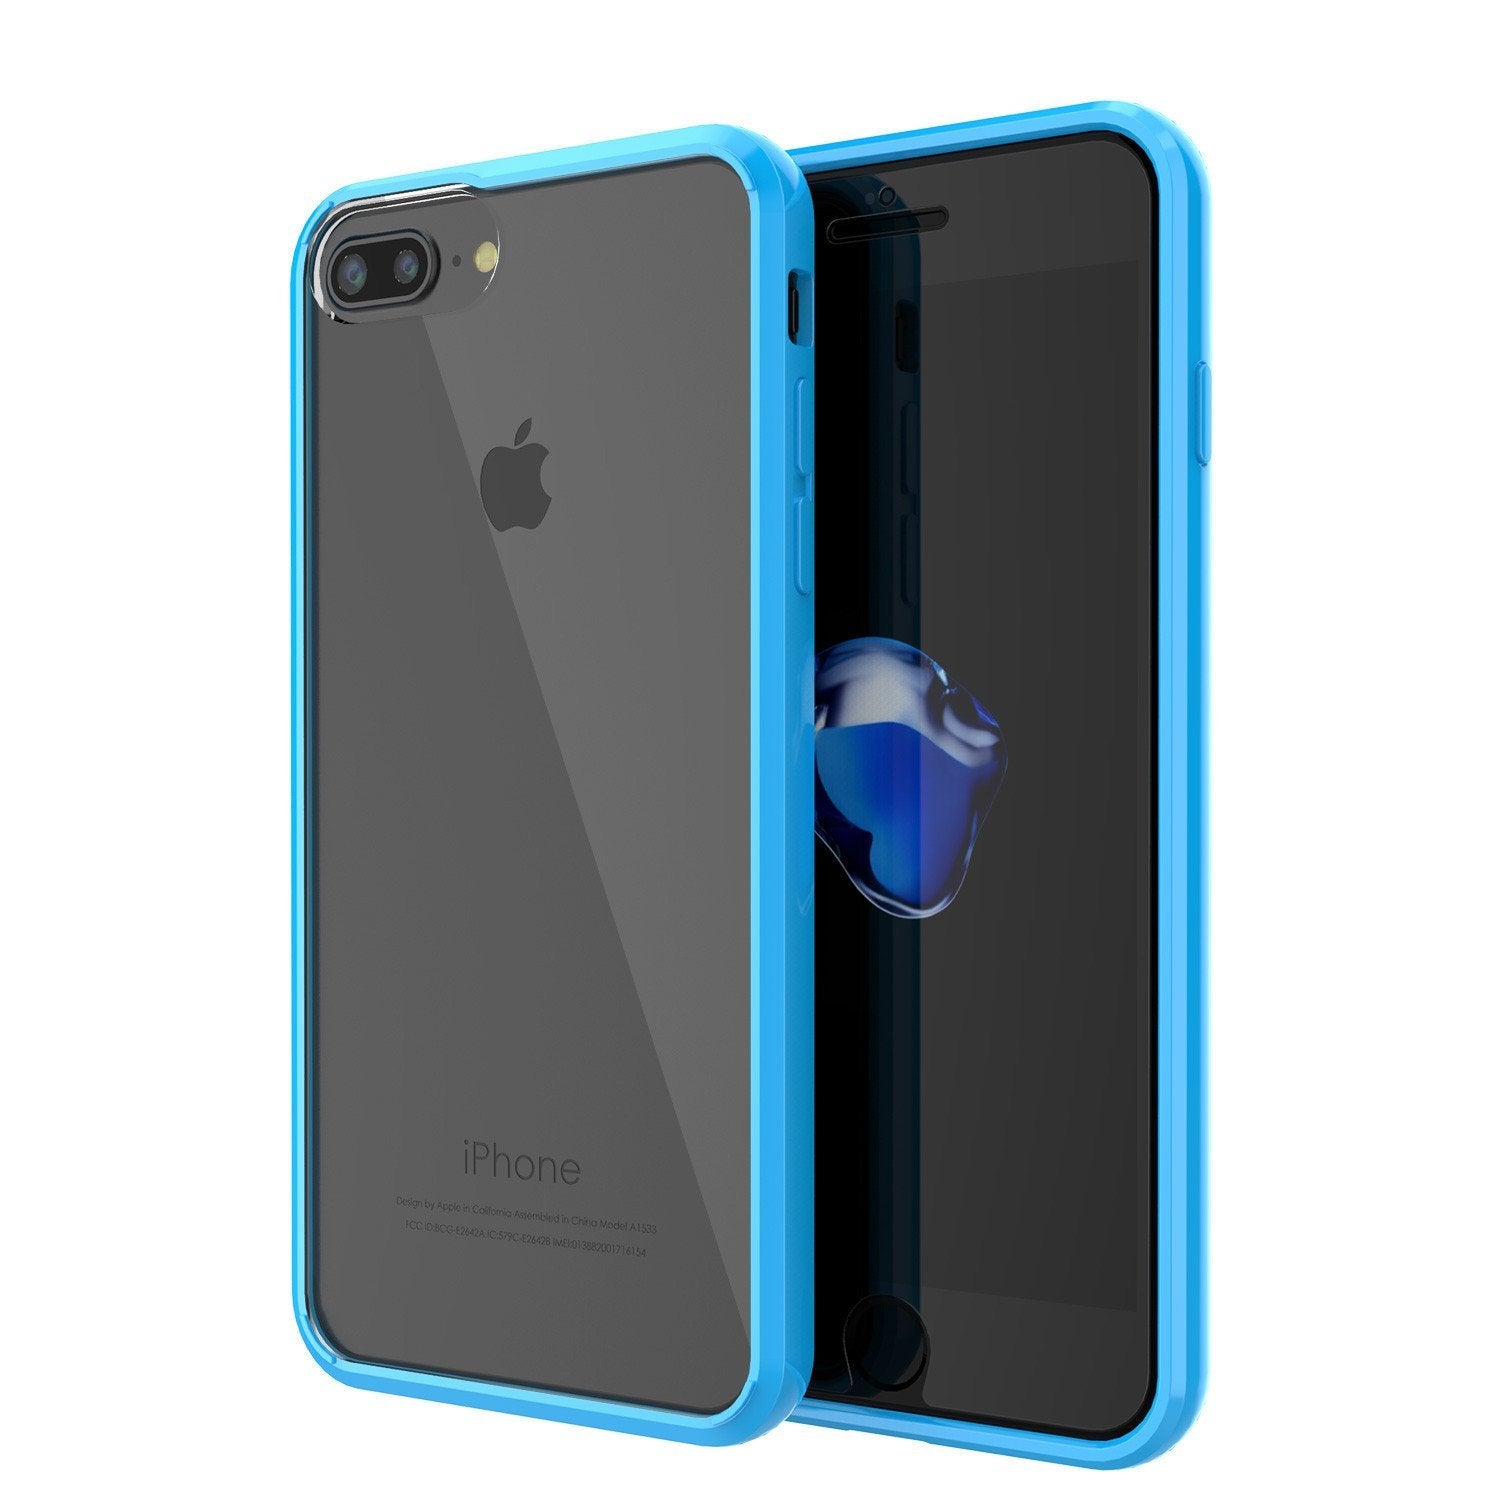 iPhone 8+ Plus Case PunkCase LUCID Clear Series for Apple iPhone 8+ Plus (Color in image: light blue)